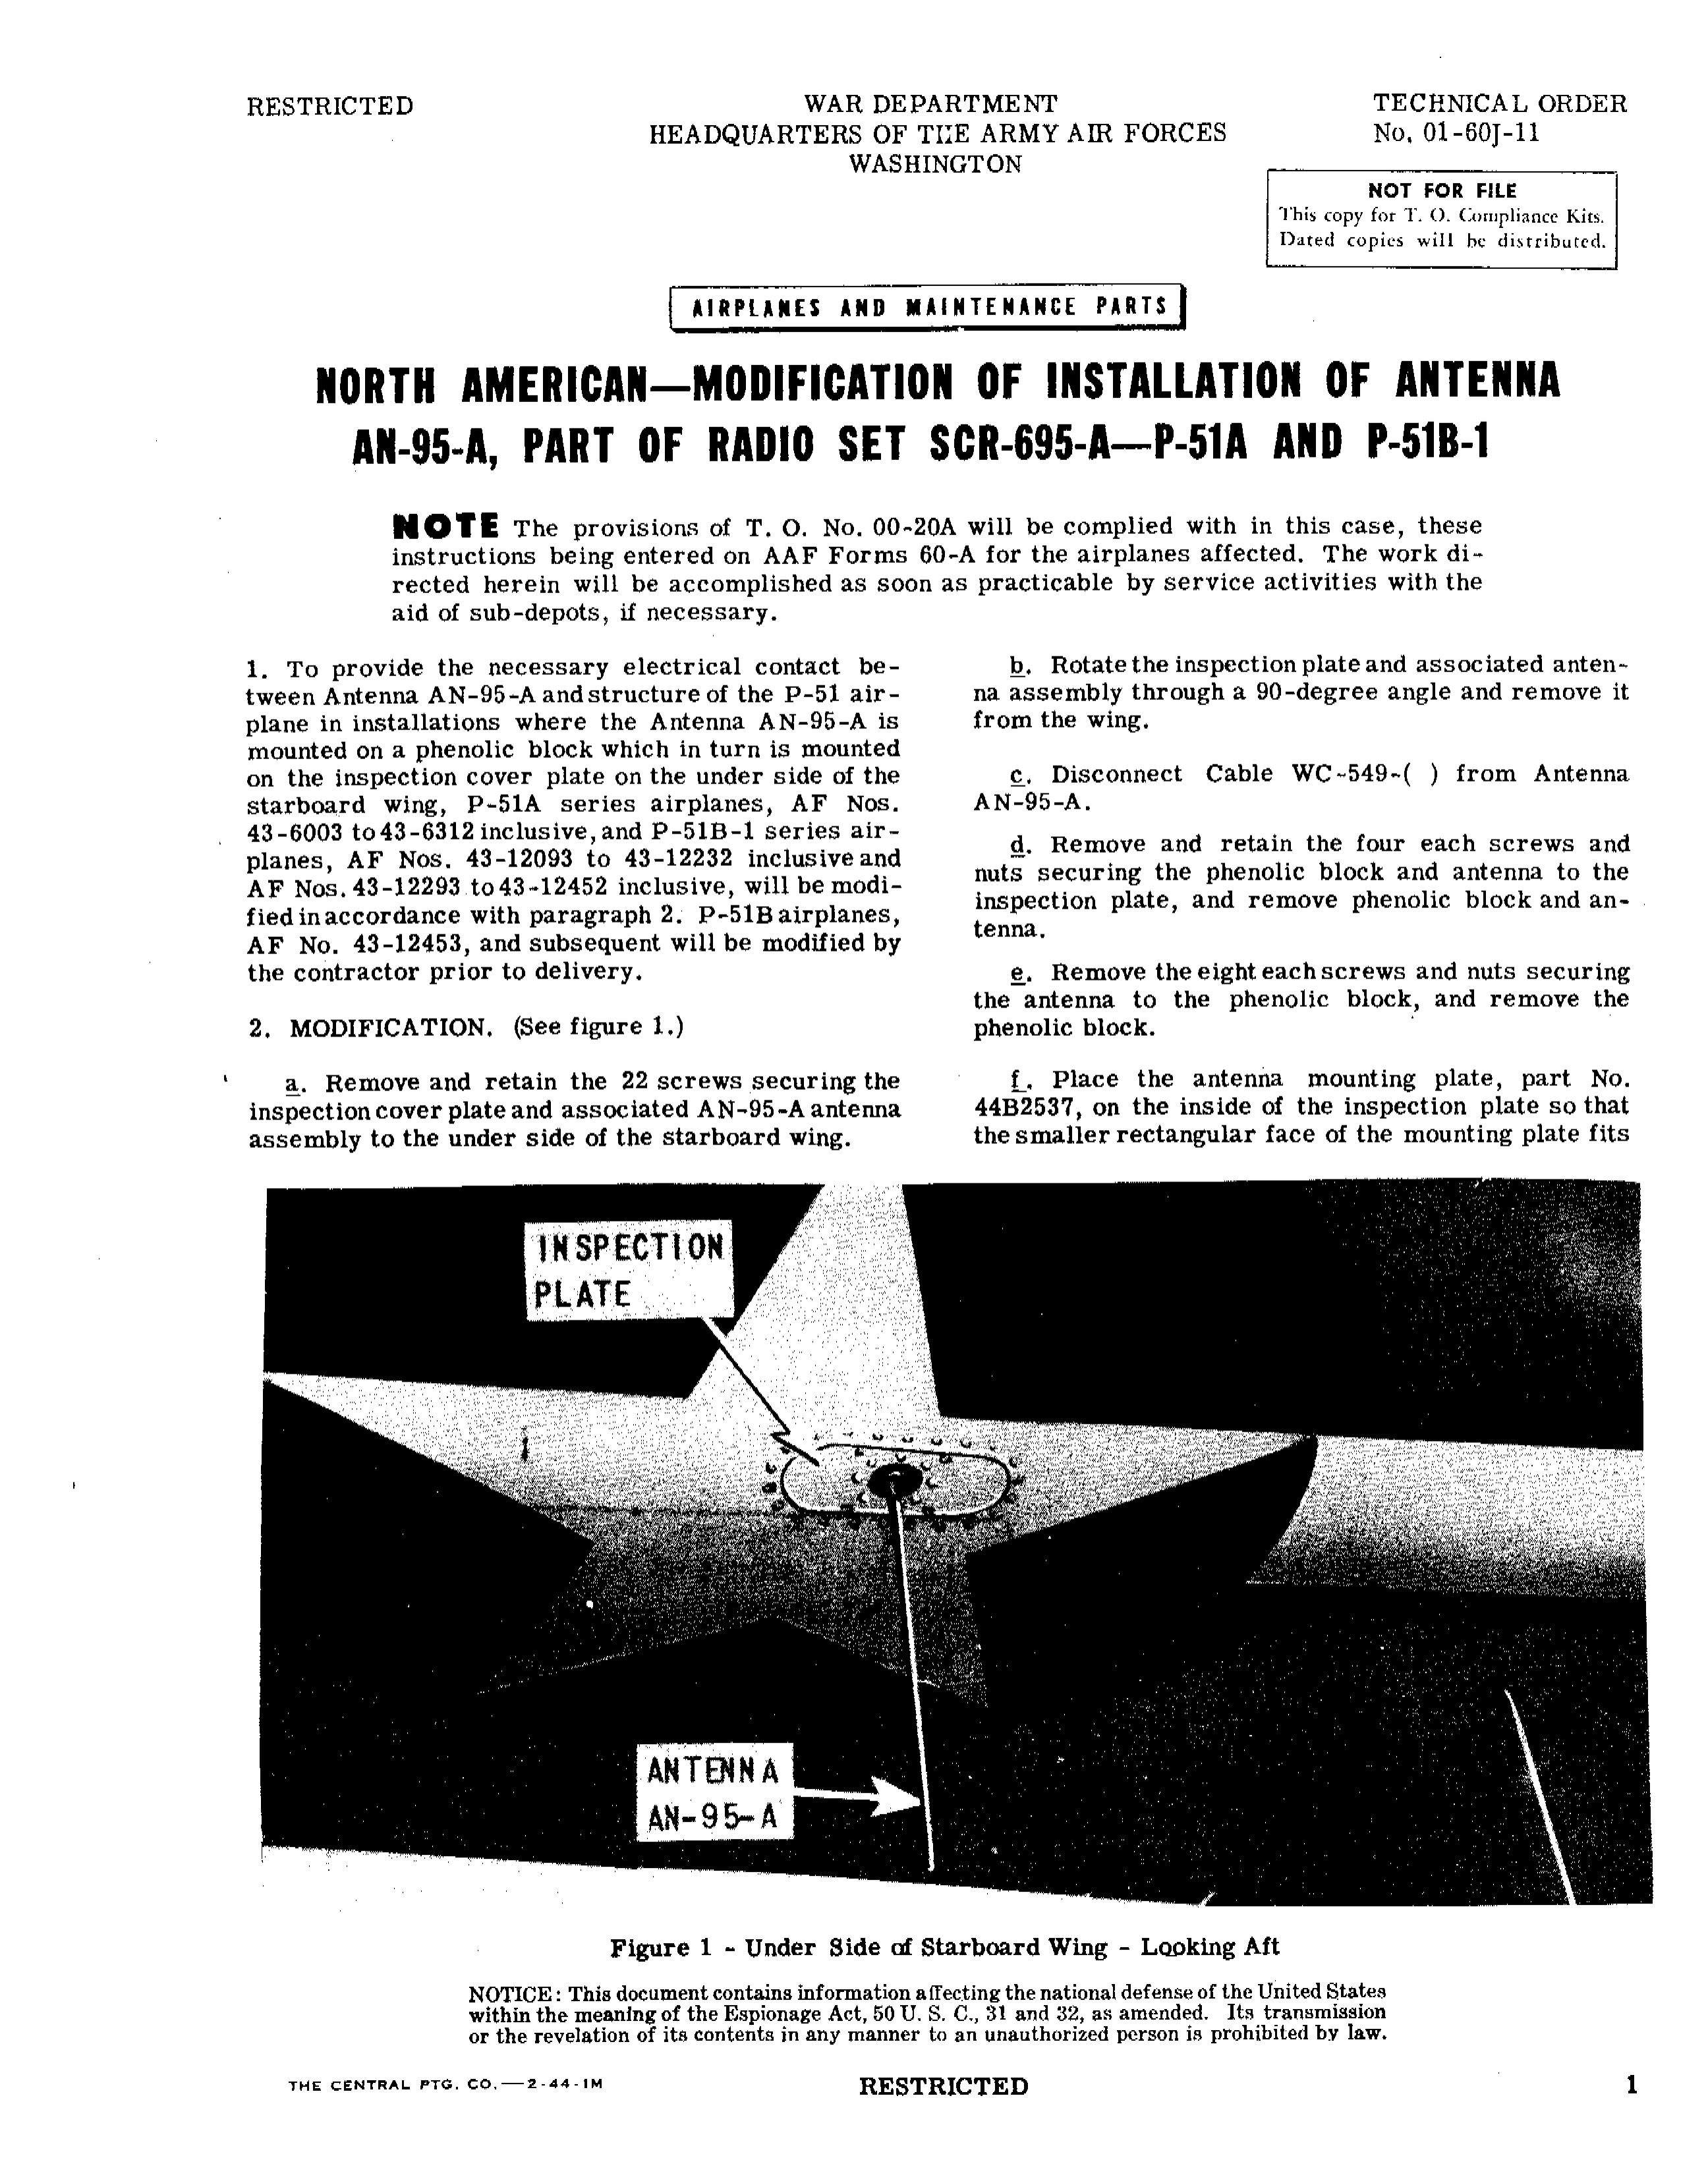 Sample page 1 from AirCorps Library document: Modification of Installation of Antenna AN-95-A, Part of Radio Set SCR-695-A